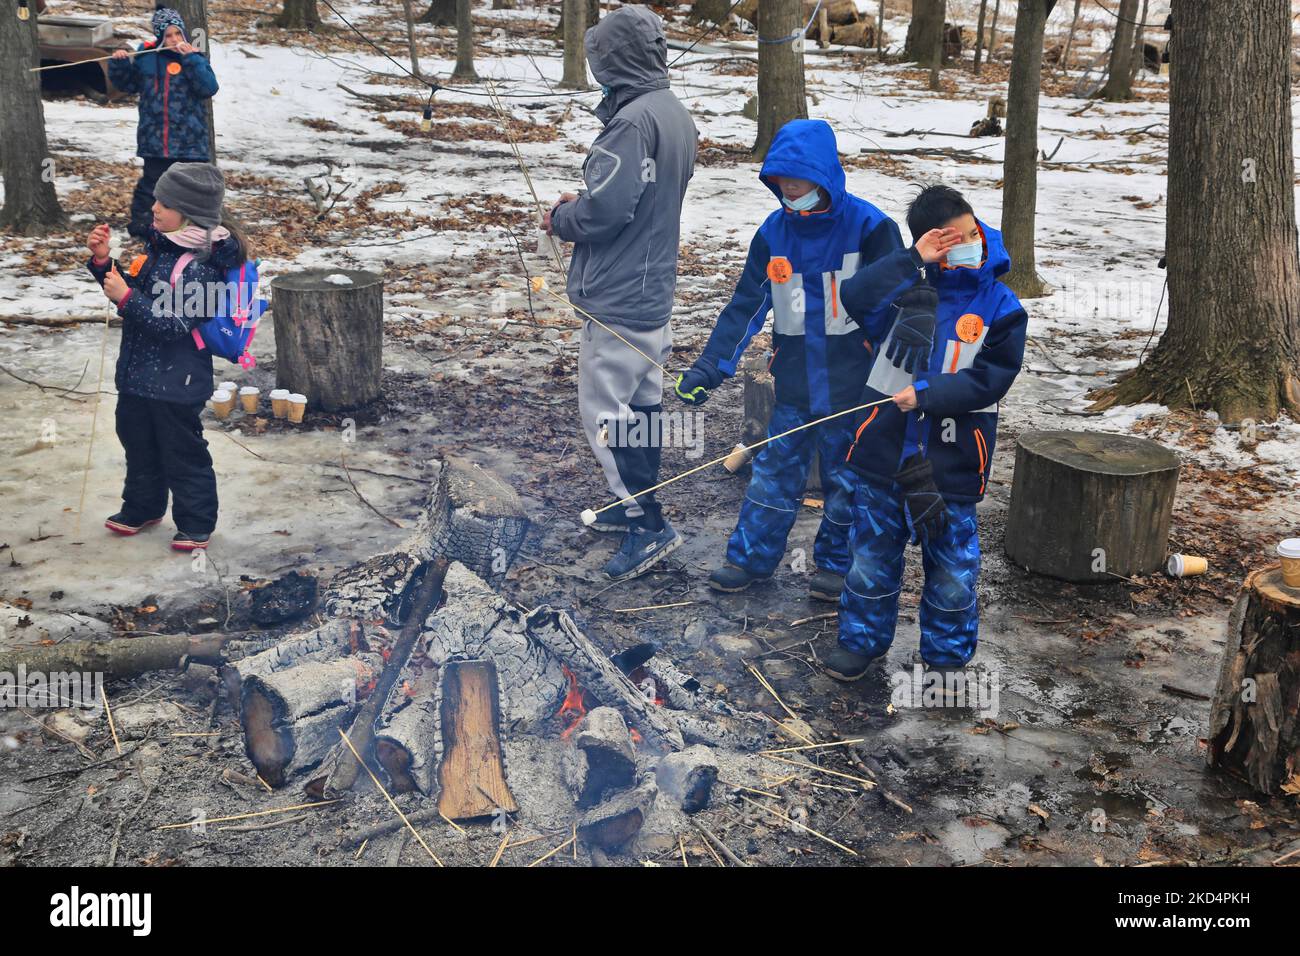 People toasting marshmallows by a small campfire while visiting the sugarbush at a maple syrup farm during the Maple Sugar Festival in Mount Albert, Ontario, Canada, on March 05, 2022. The Maple Sugar Festival celebrates maple syrup production and products made with maple syrup and takes part at many maple syrup producing farms across Ontario and Quebec. Maple syrup is only produced in North America. (Photo by Creative Touch Imaging Ltd./NurPhoto) Stock Photo